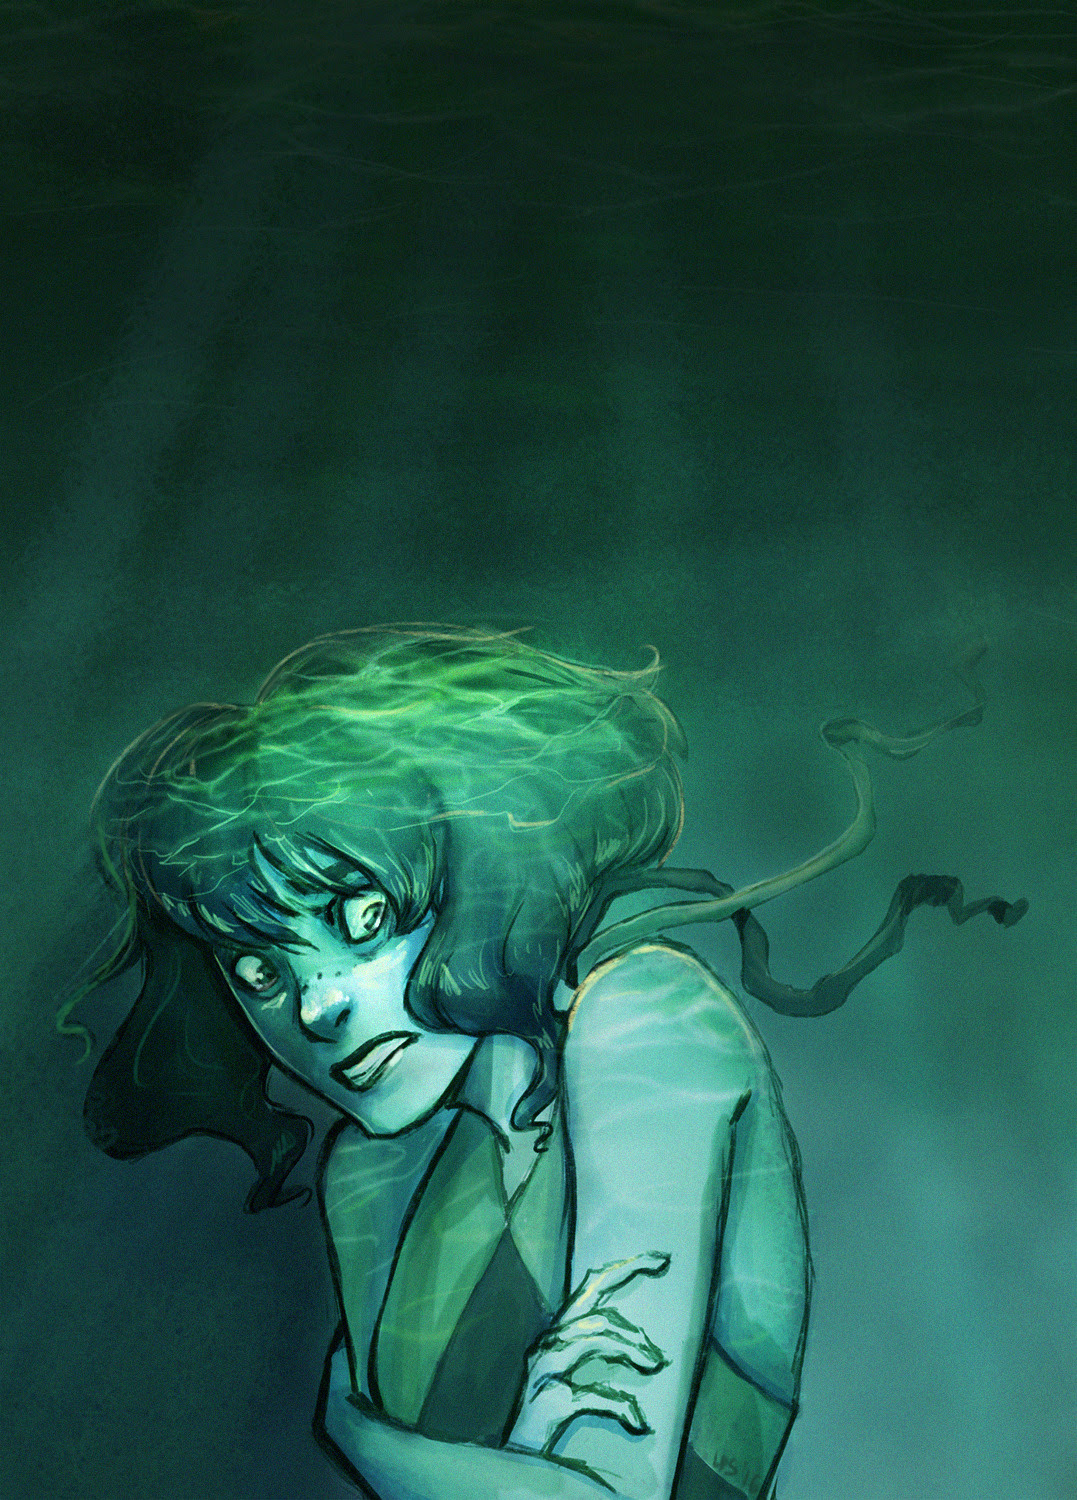 Lapis Lazuli… oh, I wanna more episodes about her! Please, save her!